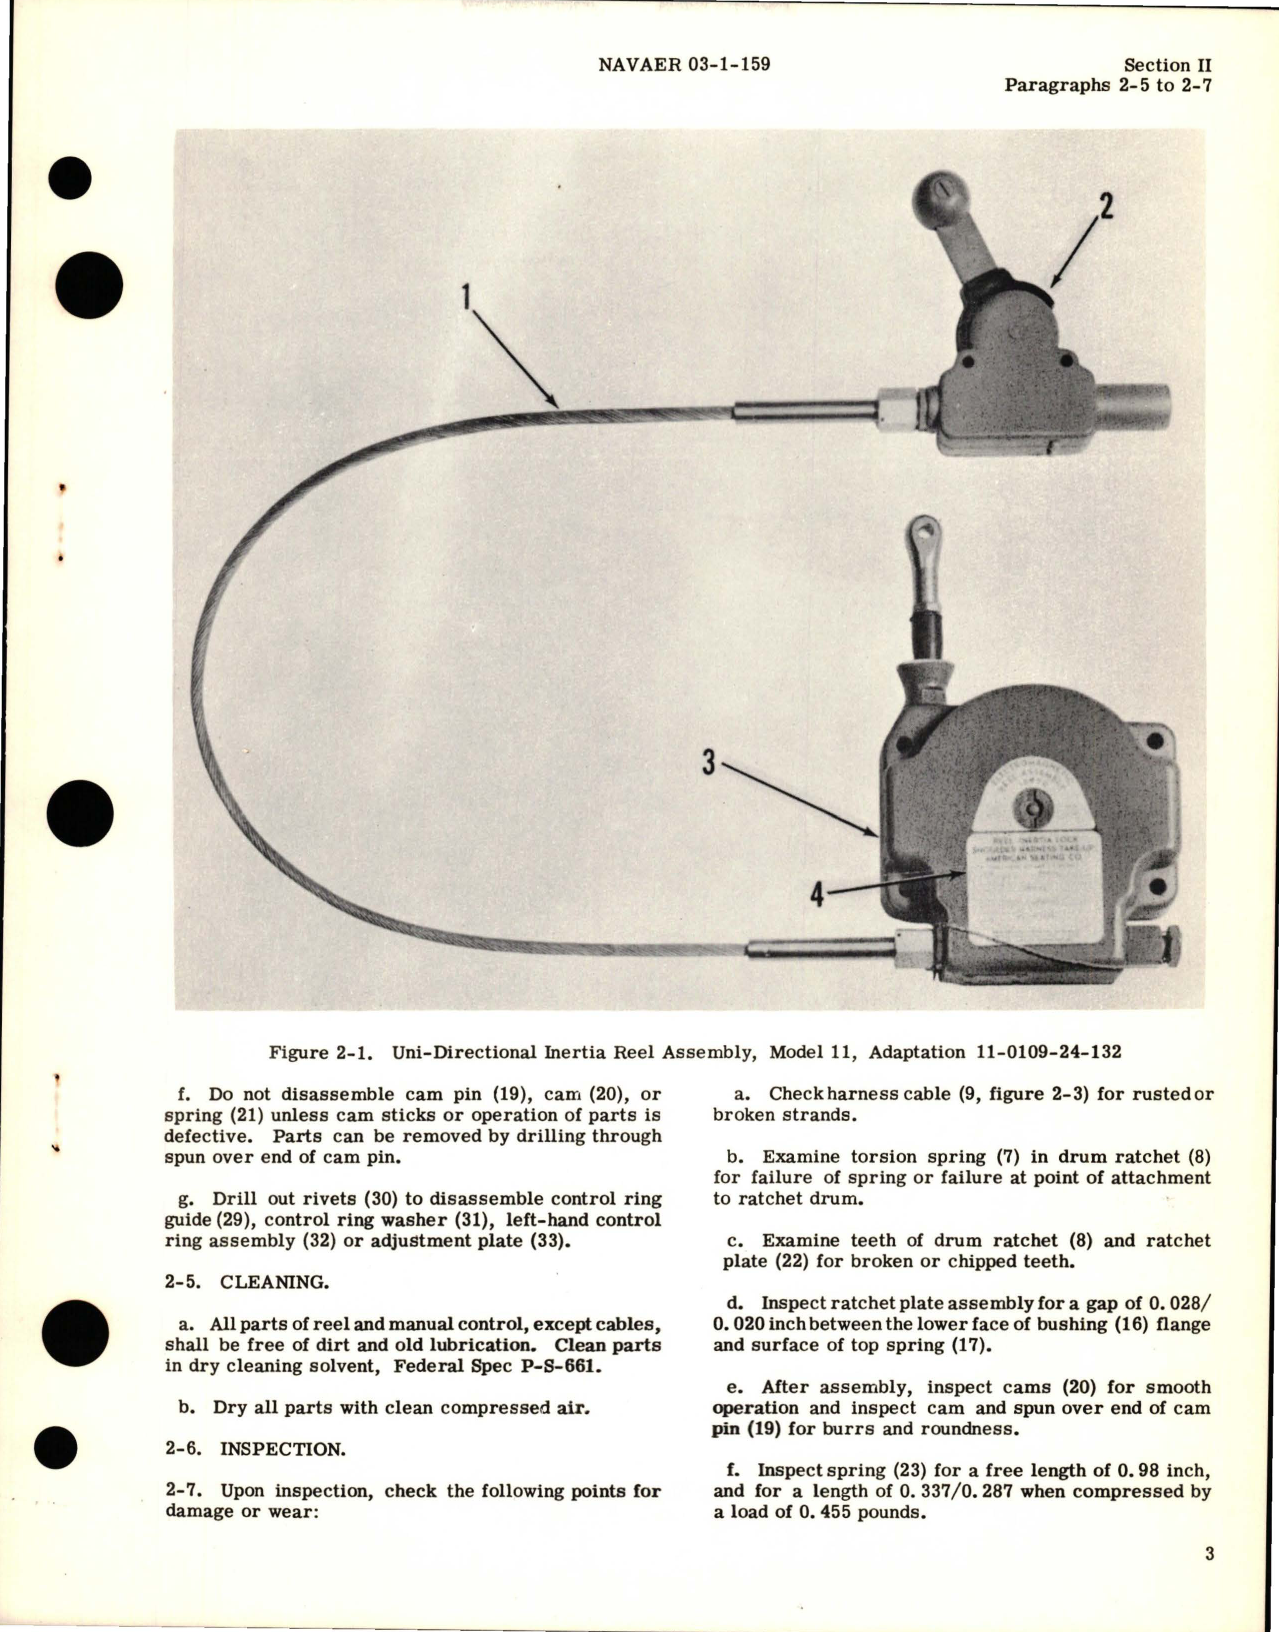 Sample page 5 from AirCorps Library document: Overhaul Instructions for Uni-Directional Inertia Reel Assembly - Model 11